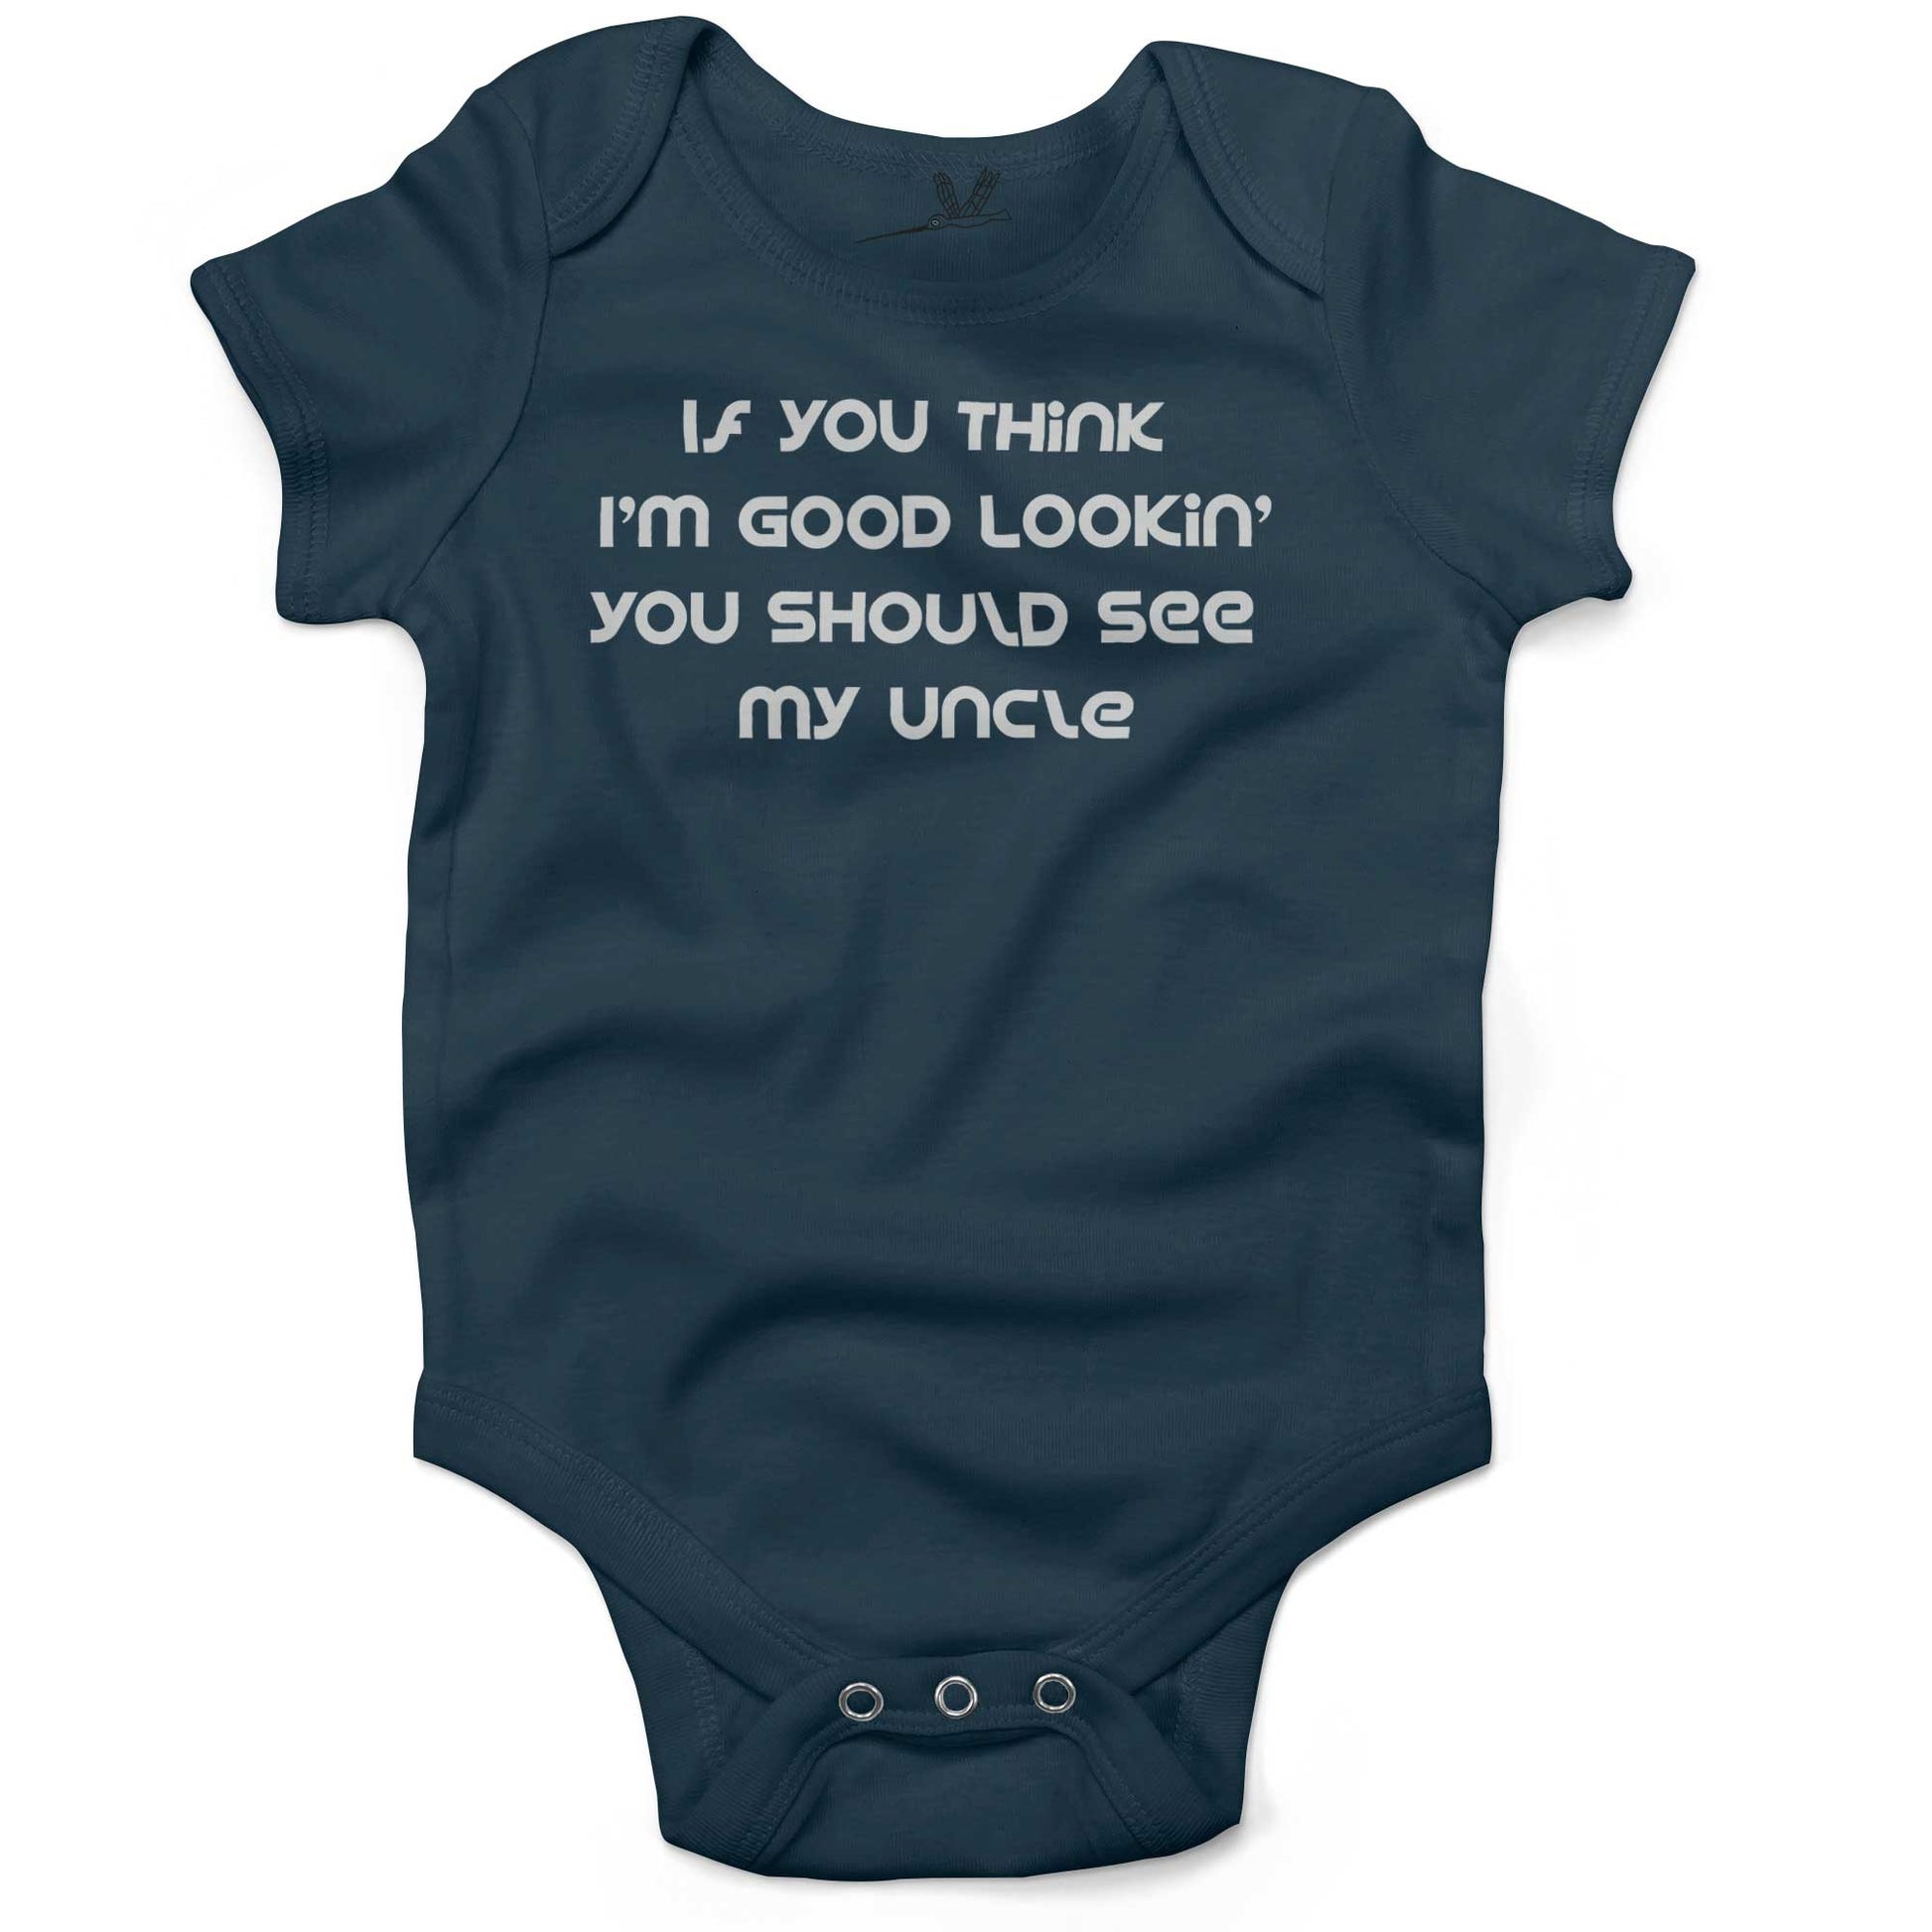 If You Think I'm Good Lookin' You Should See My Uncle Infant Bodysuit or Raglan Tee-Organic Pacific Blue-3-6 months